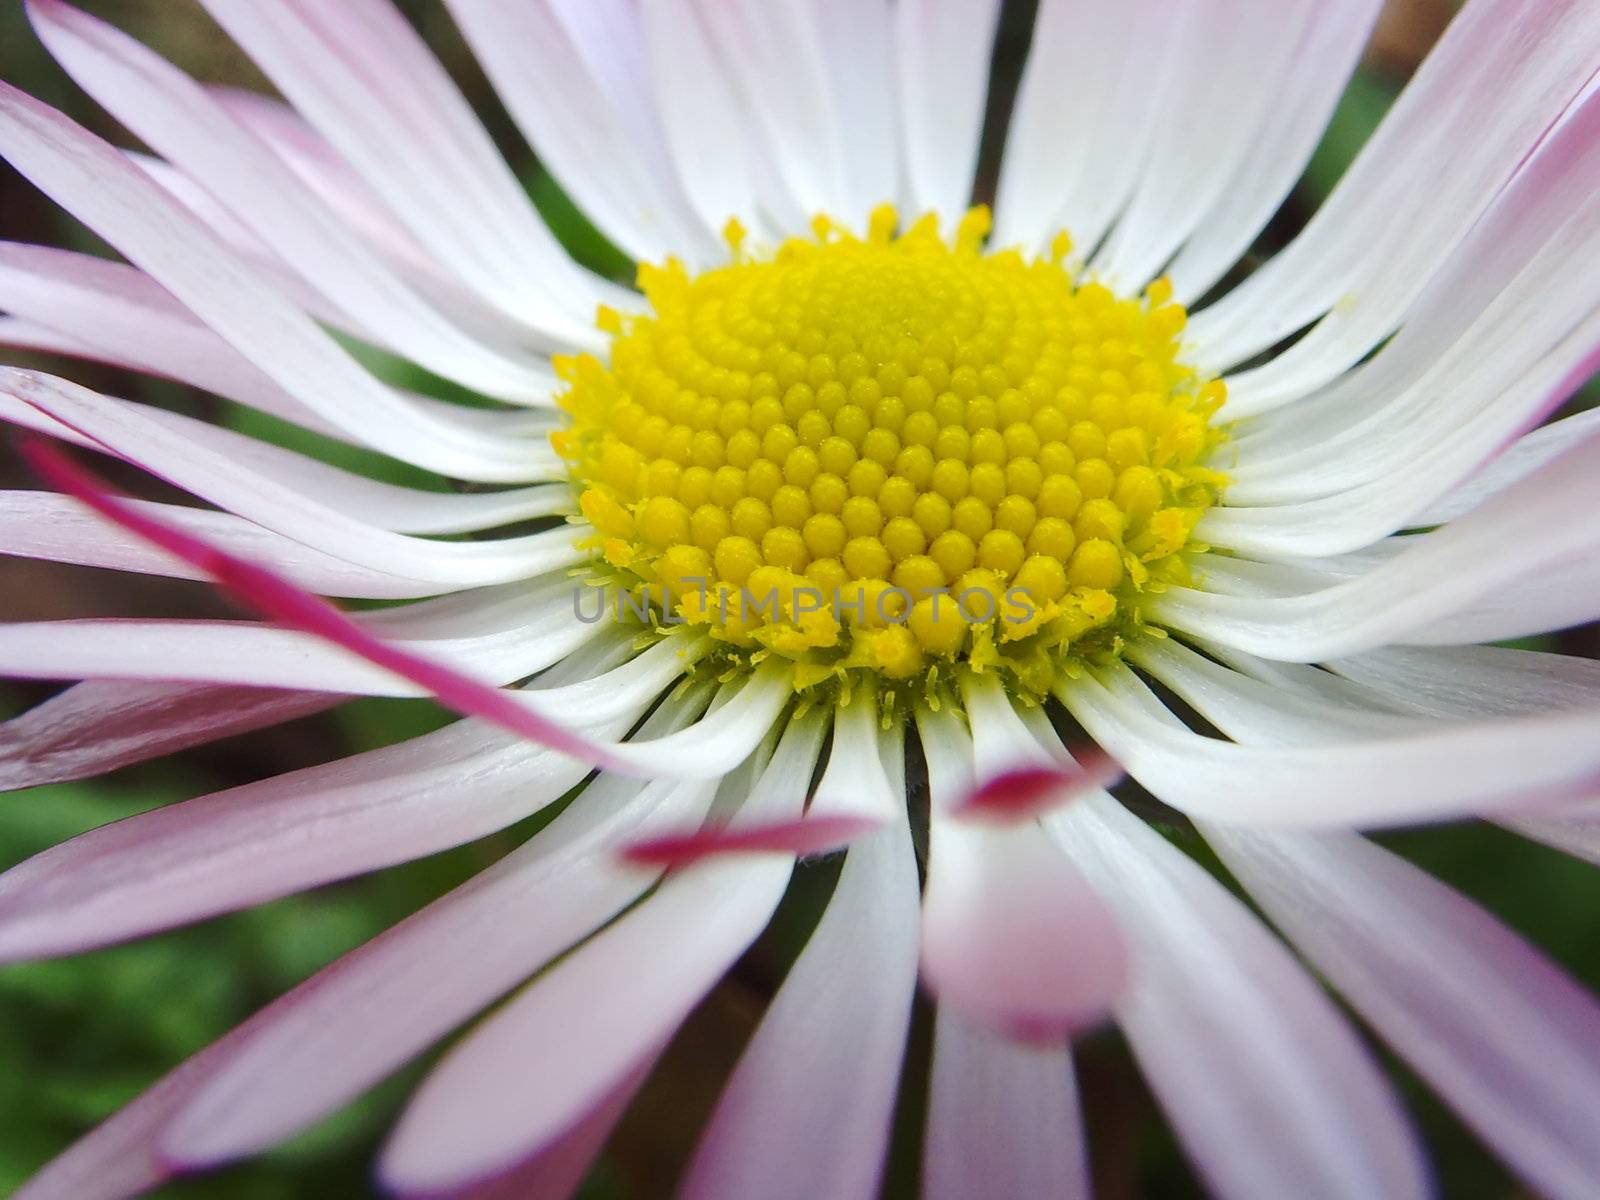 a close up of a daisy flower widelly open